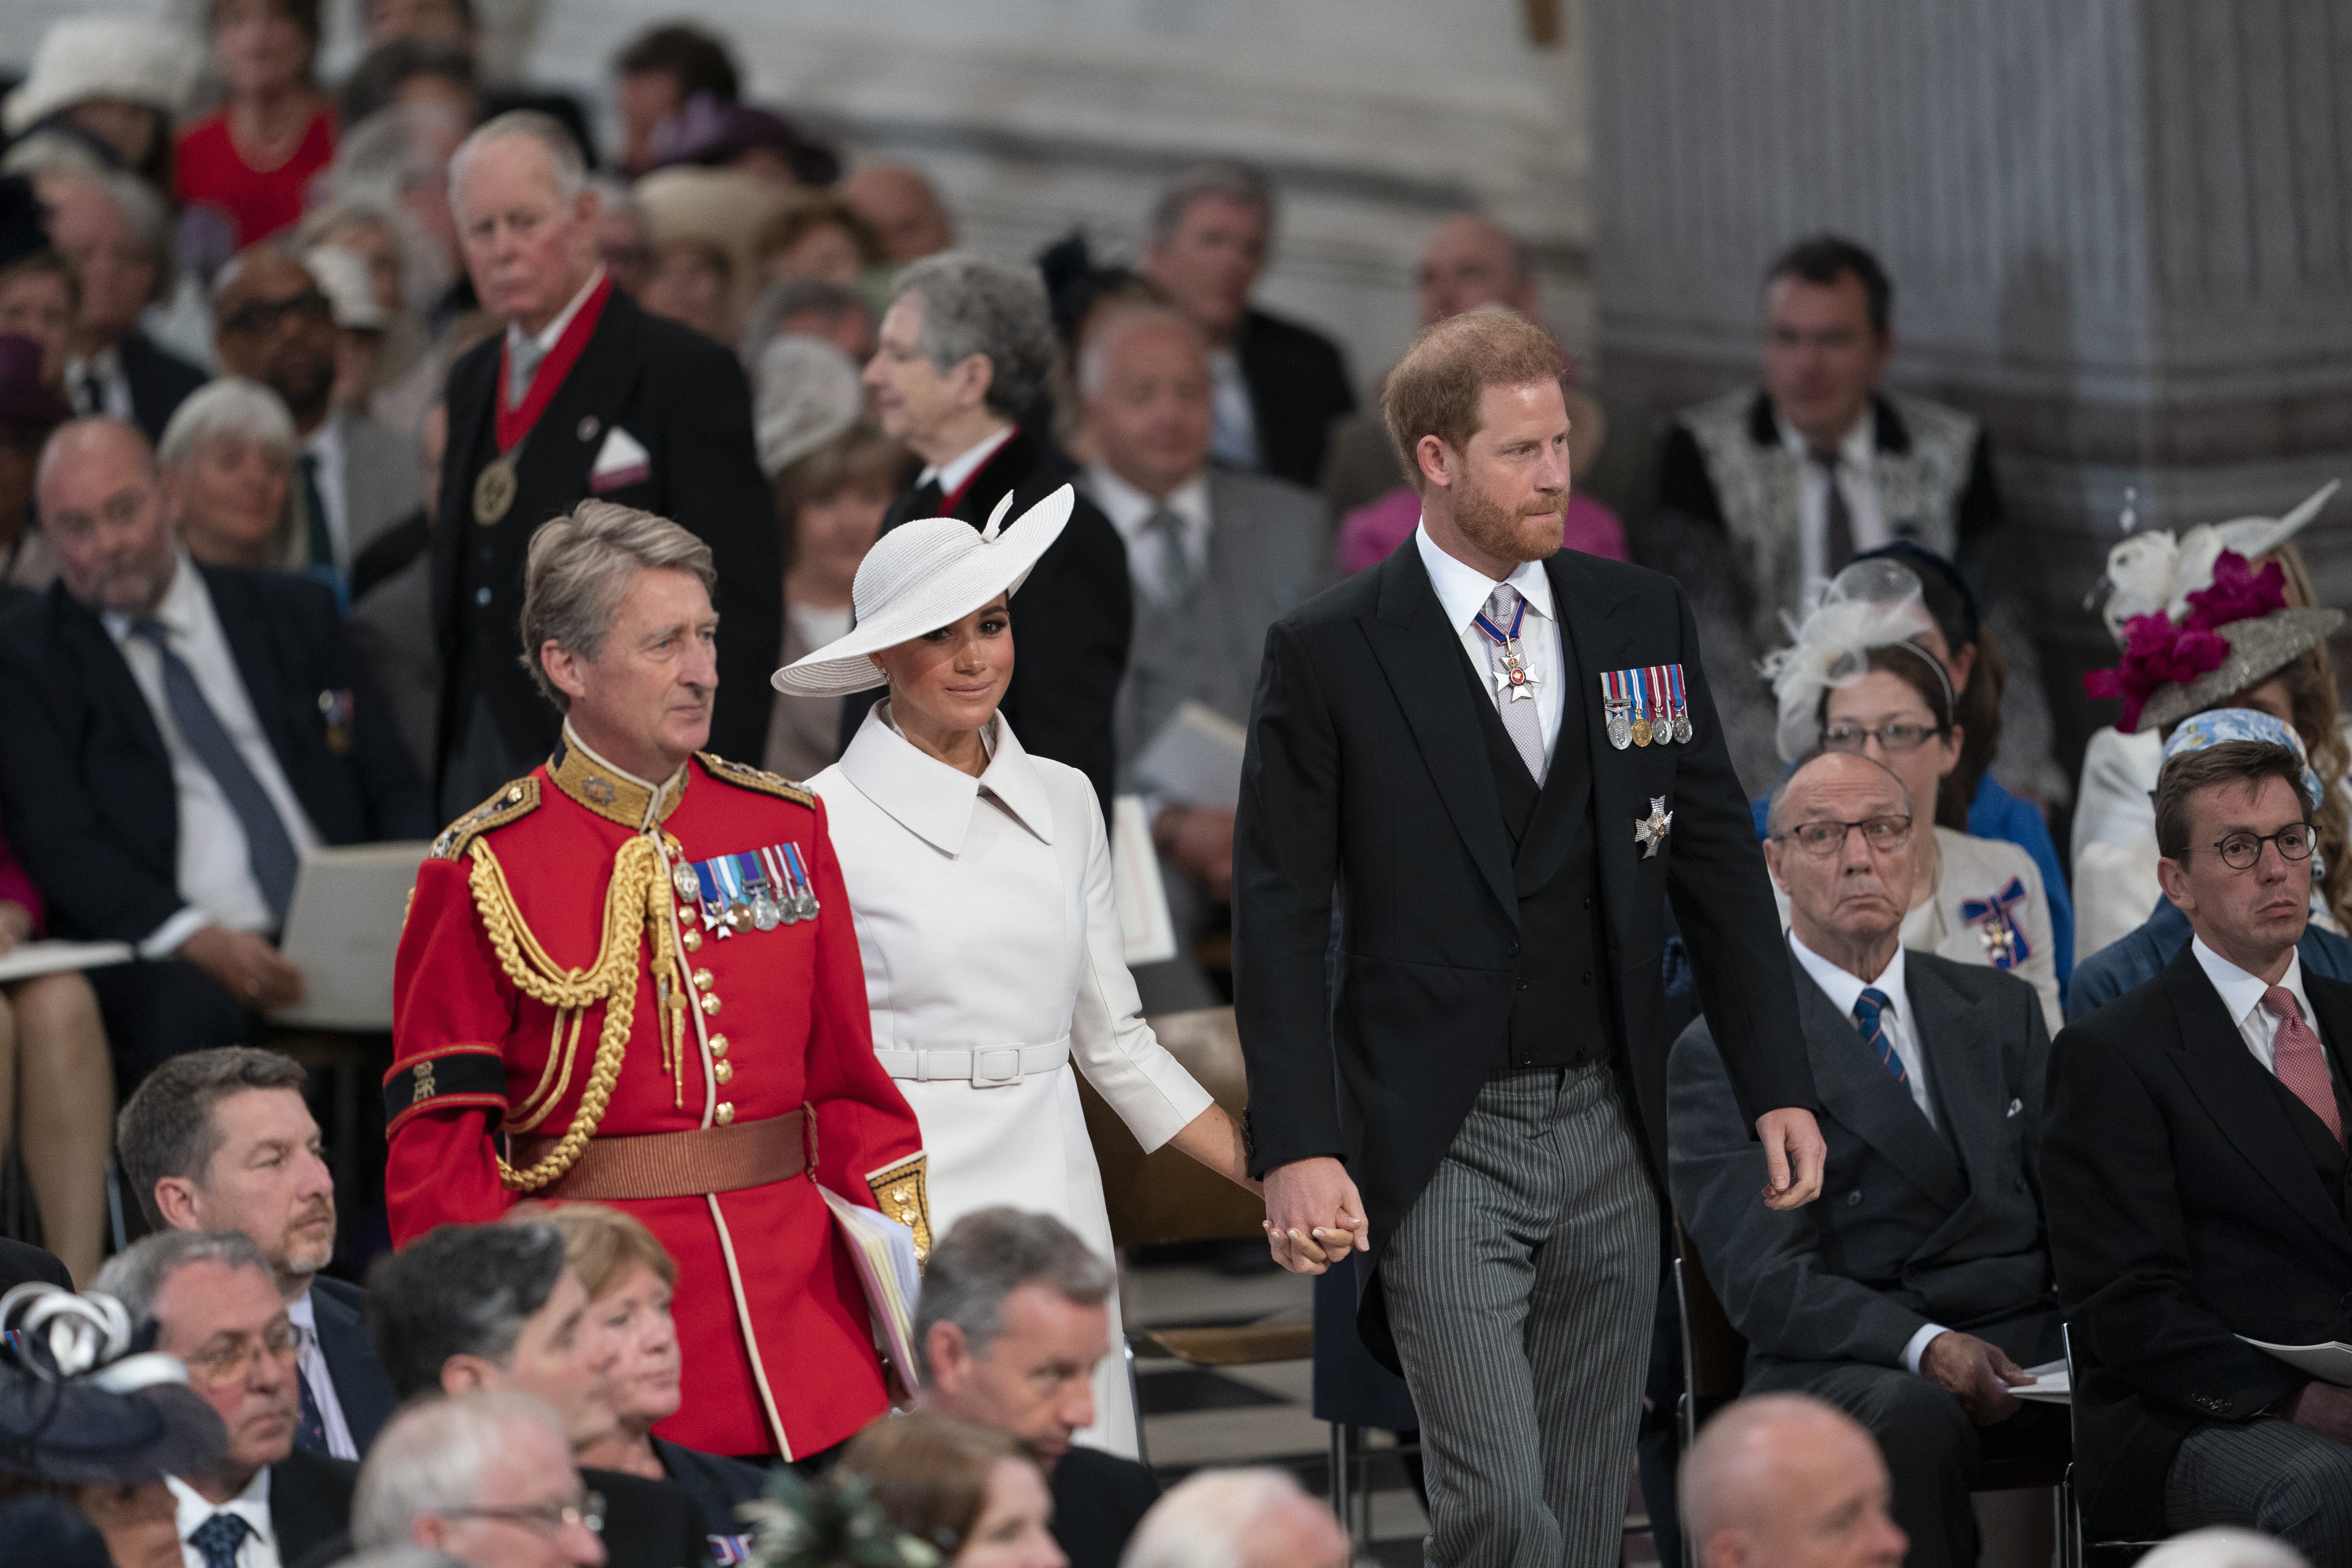 Prince Harry and Meghan Markle attending the service of Thanksgiving for the Queen on June 3, 2022 in London, England. | Source: Getty Images